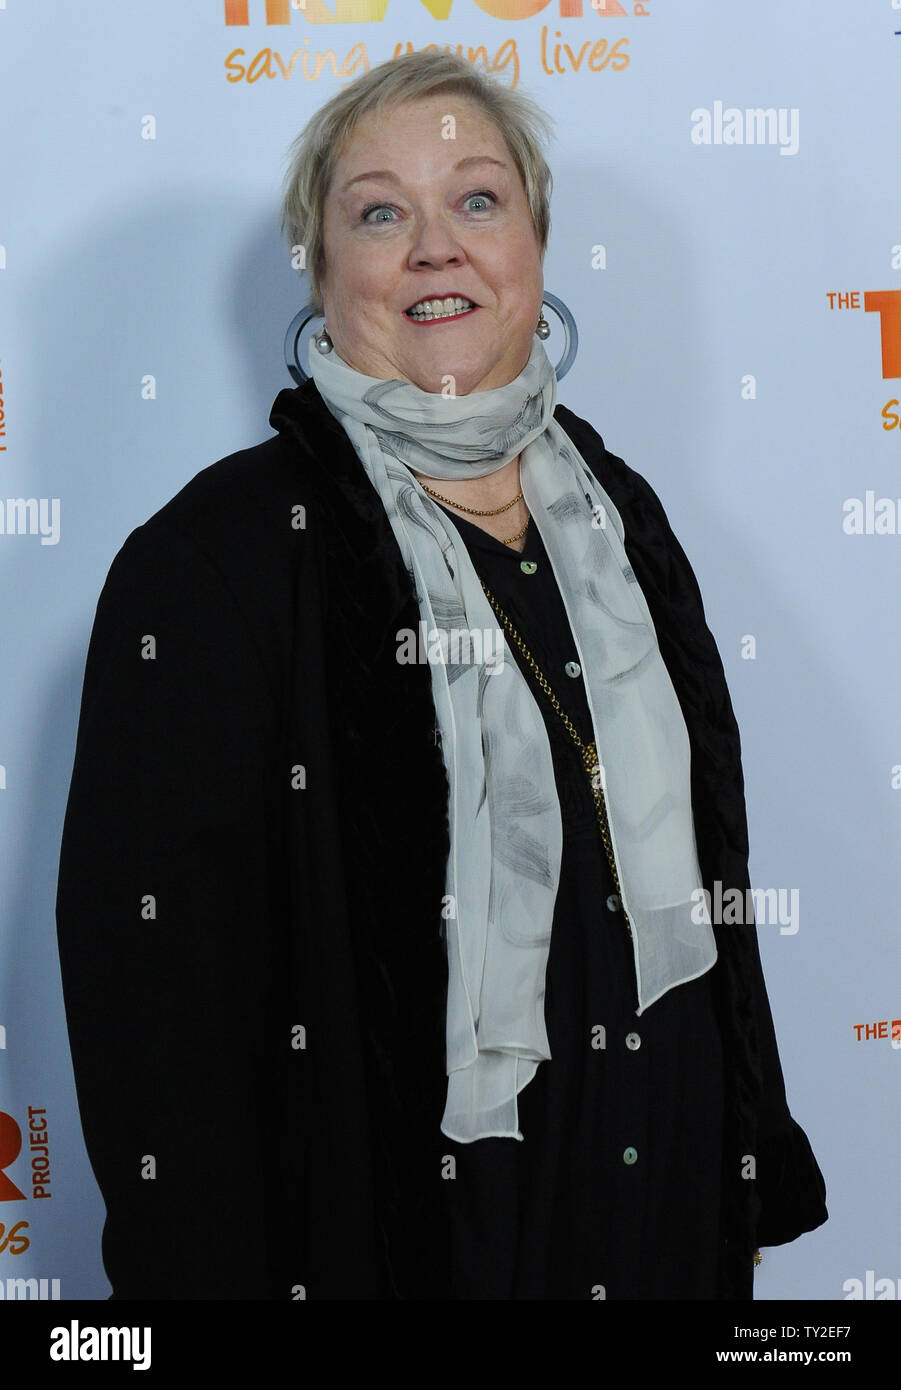 Actress Kathy Kinney attends the Trevor Live event honoring Lady Gaga and Google Inc. at the Hollywood Palladium in Los Angeles on December 4, 2011.  UPI/Jim Ruymen Stock Photo